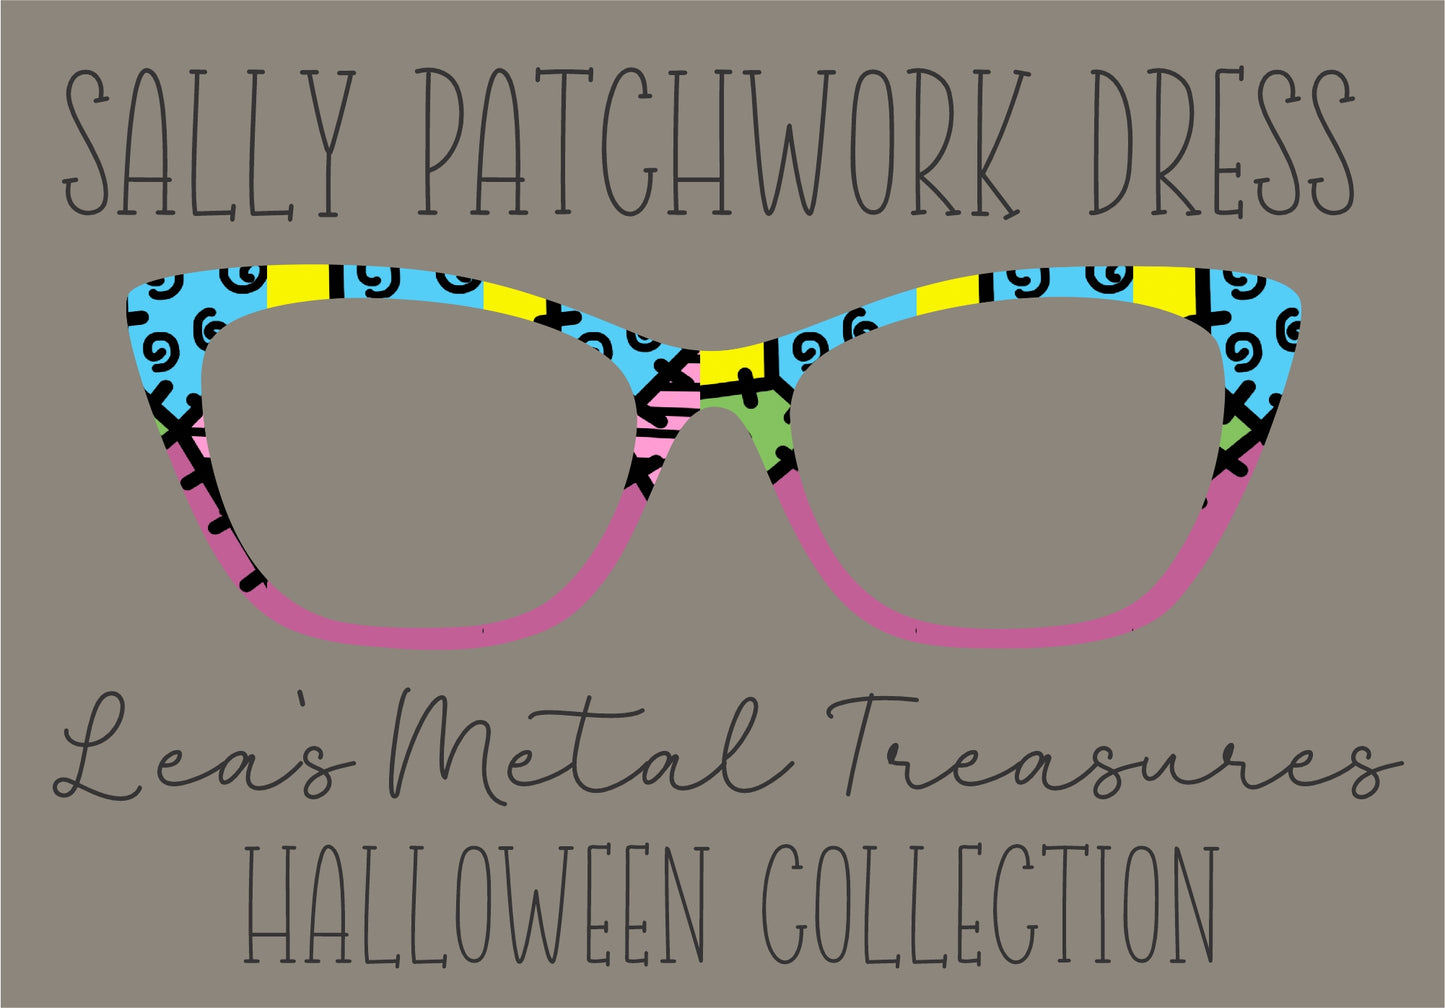 SALLY PATCHWORK DRESS Eyewear Frame Toppers COMES WITH MAGNETS